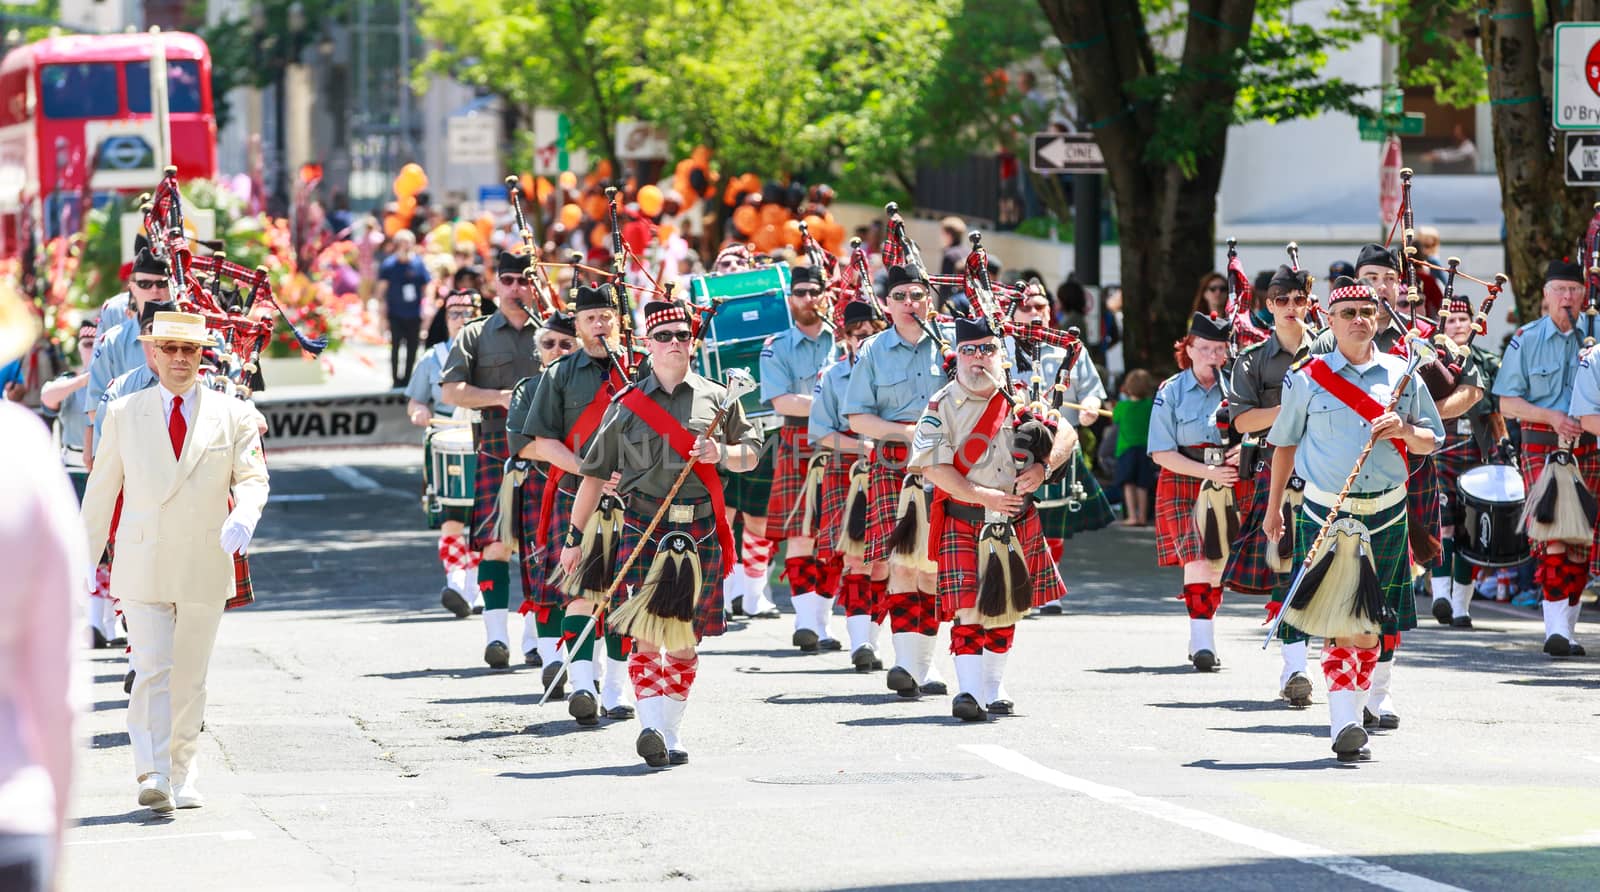 Portland, Oregon, USA - JUNE 7, 2014: Clan Macleay Pipe Band in Grand floral parade through Portland downtown.